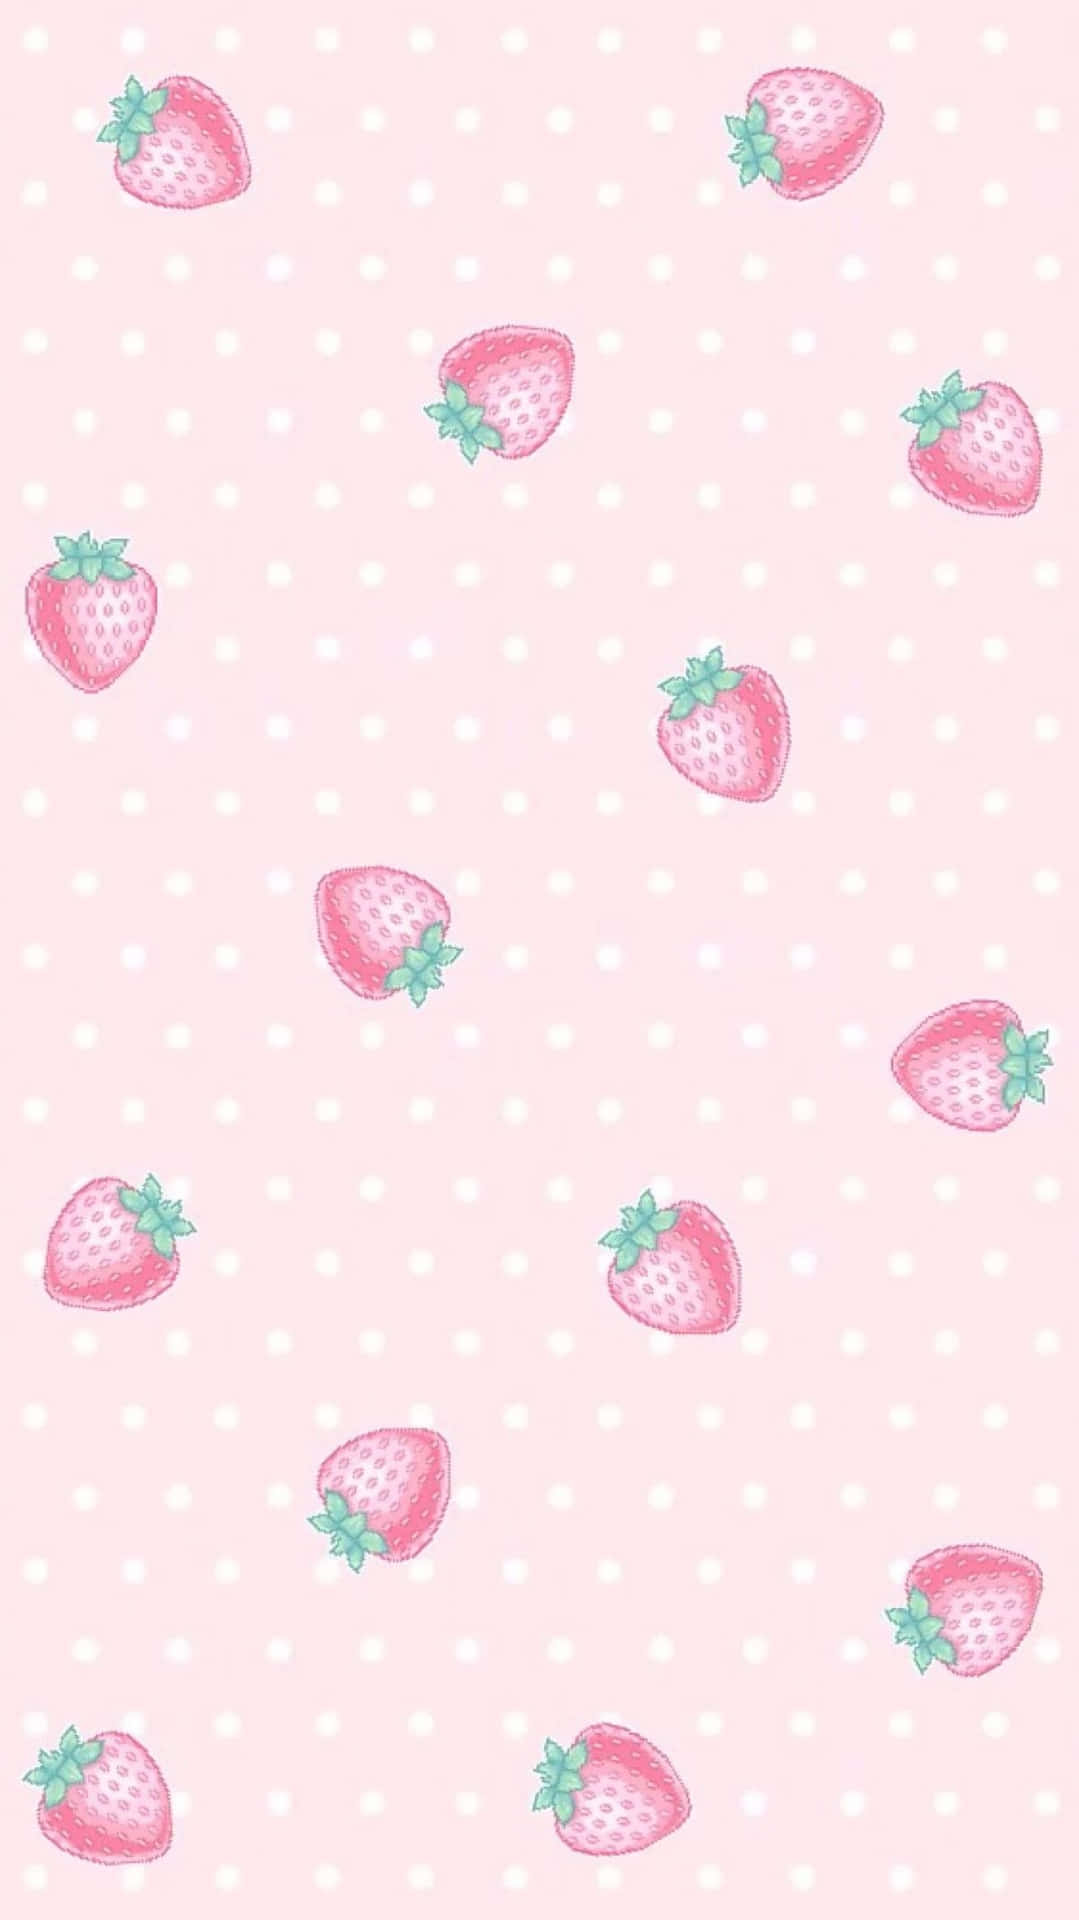 A Sweet, Colorful Treat - Pastel Strawberry Wallpaper